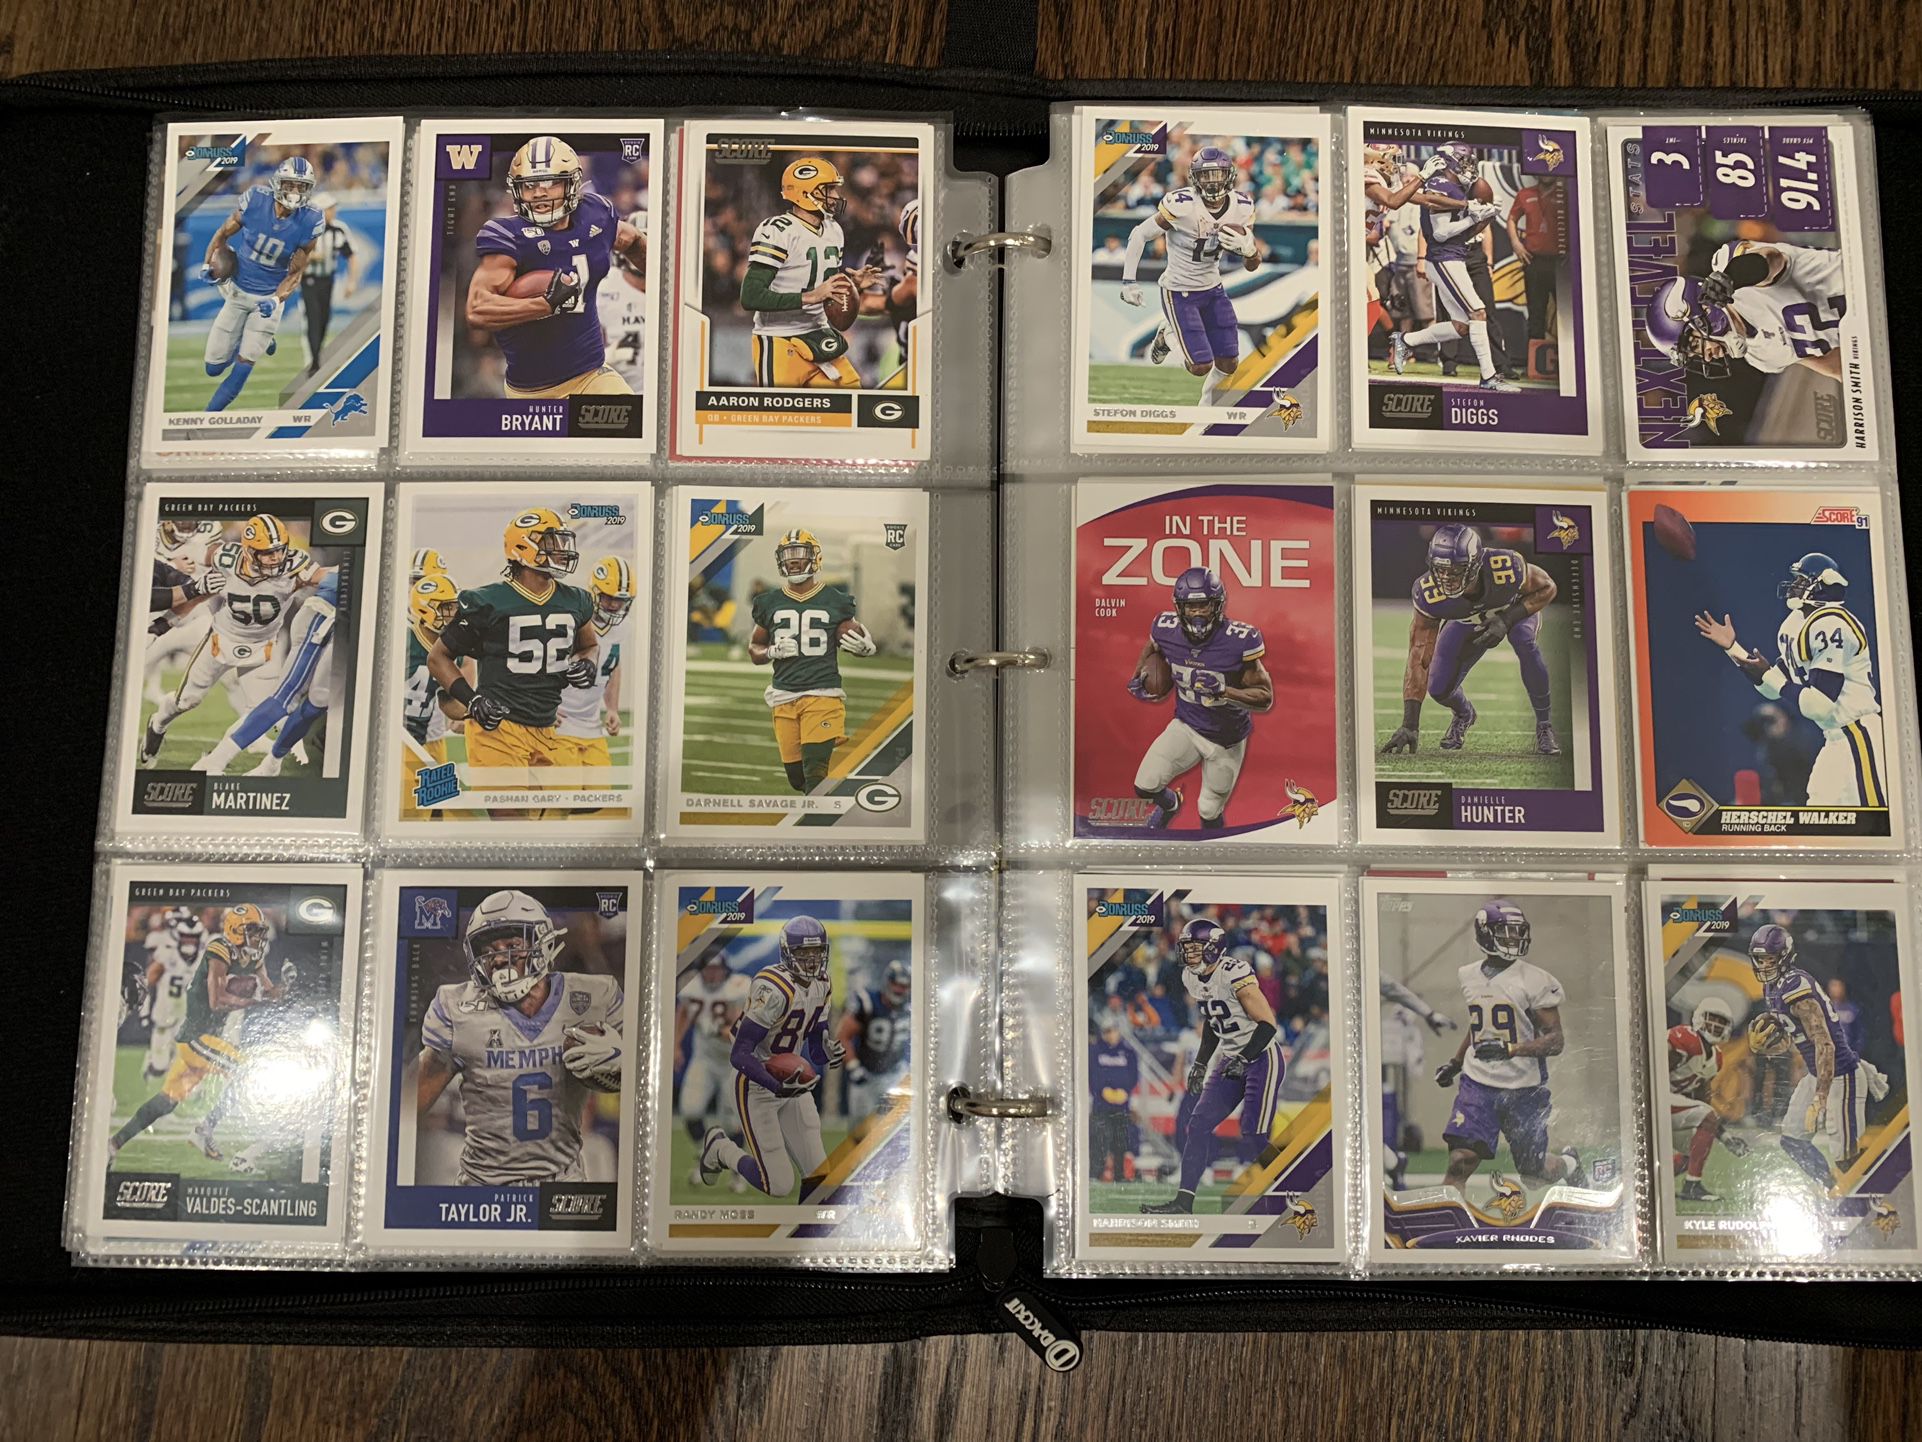 400+ Baseball And Football Cards Collection W Binder + Patrick Machines Rated Rookie Card